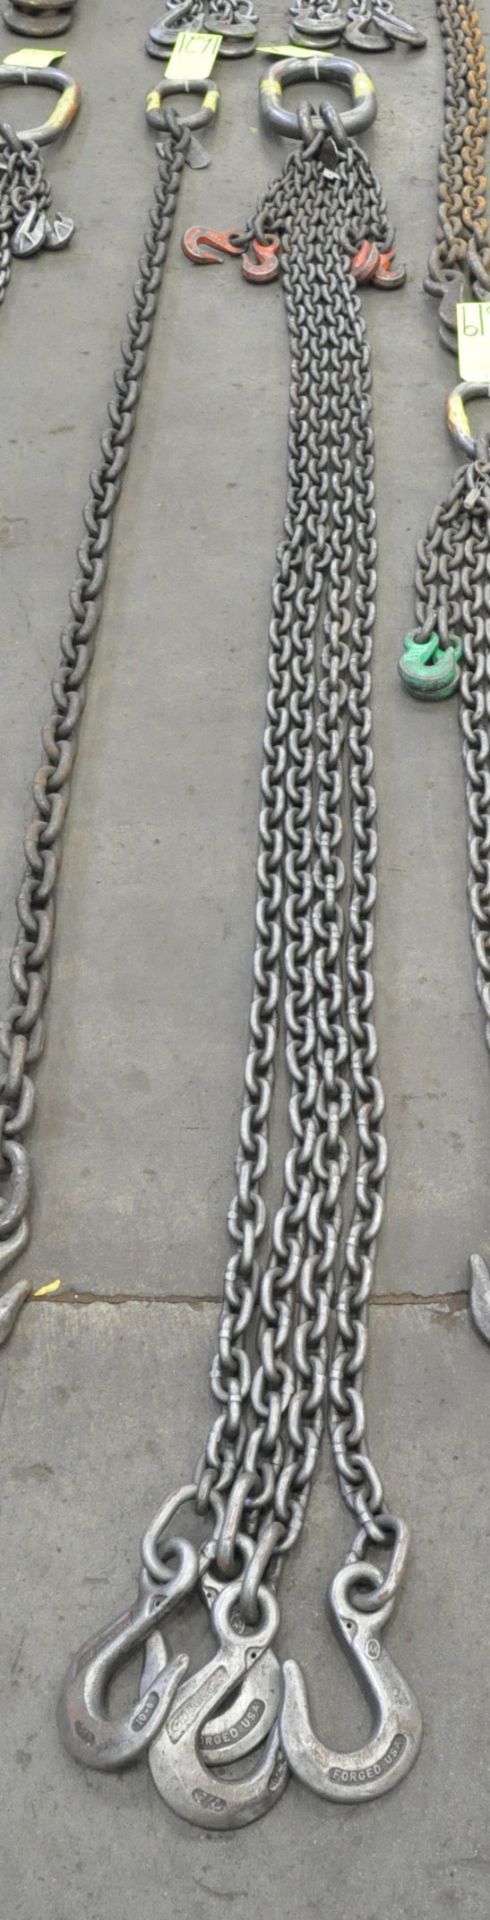 3/8" Link x 9' 6" Long 4-Hook Chain Sling with (4) Chokers), Cert Tag, (G-23), (Yellow Tag) - Image 2 of 2